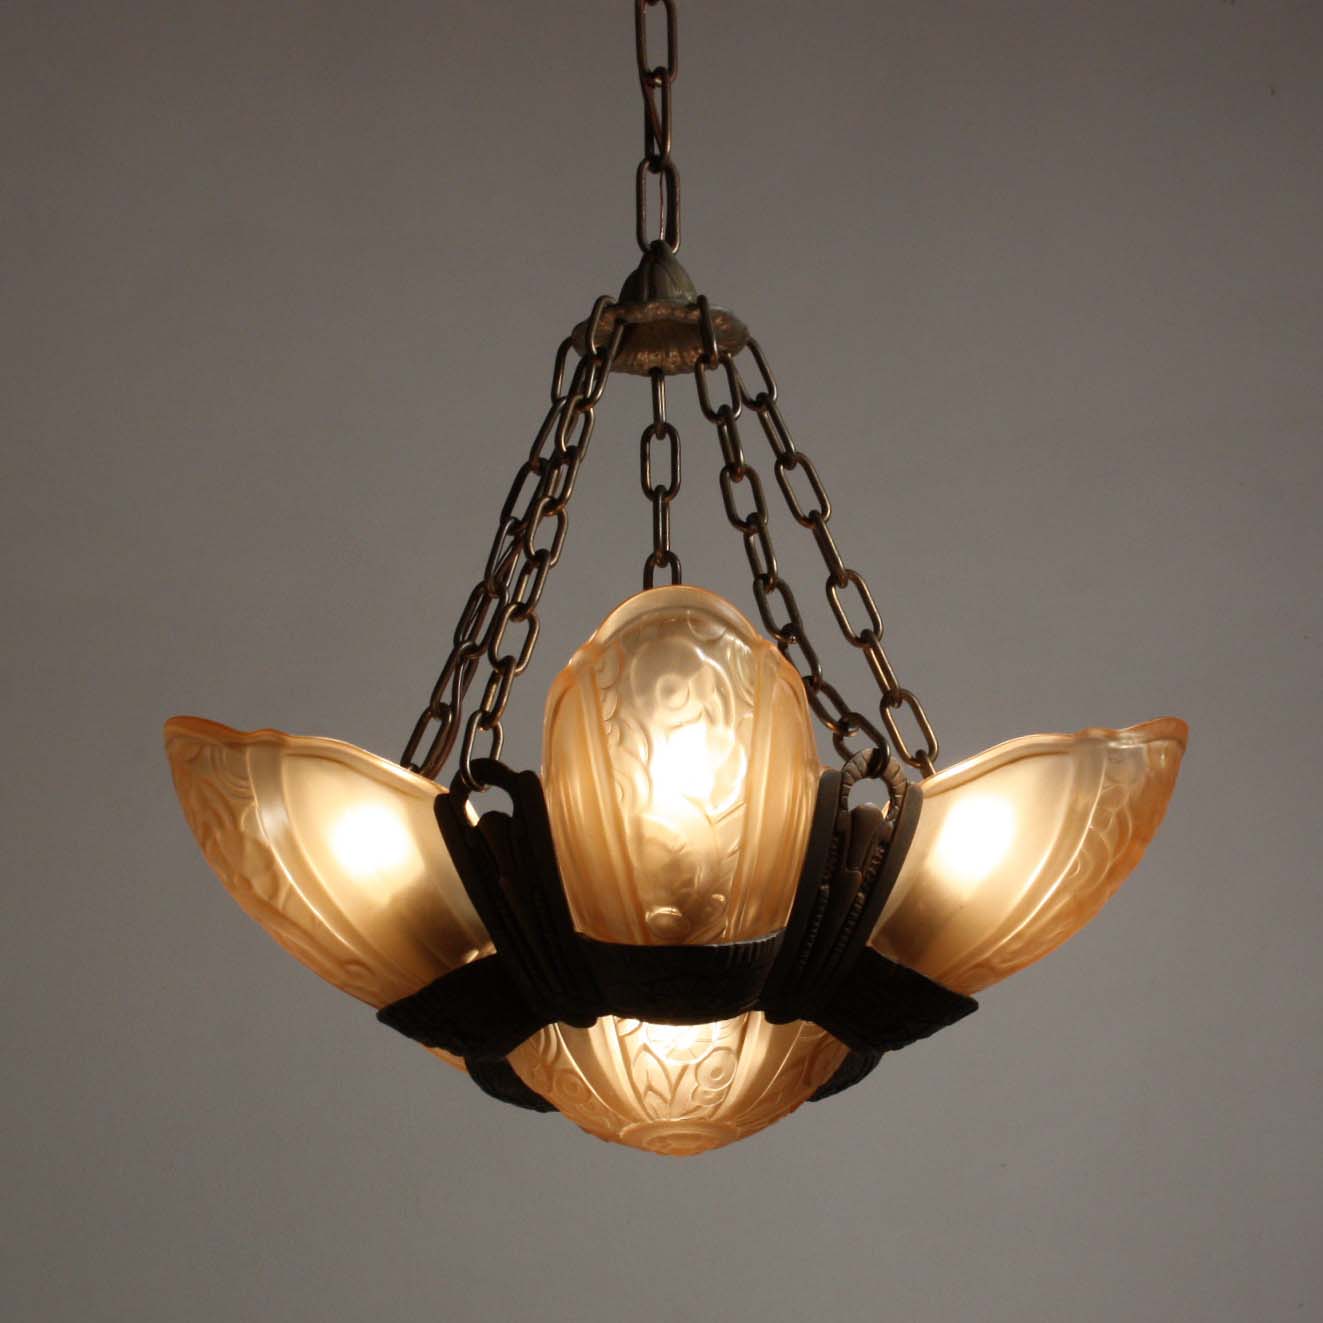 Art Deco Slip Shade Chandelier by Lincoln, Antique Lighting-68092